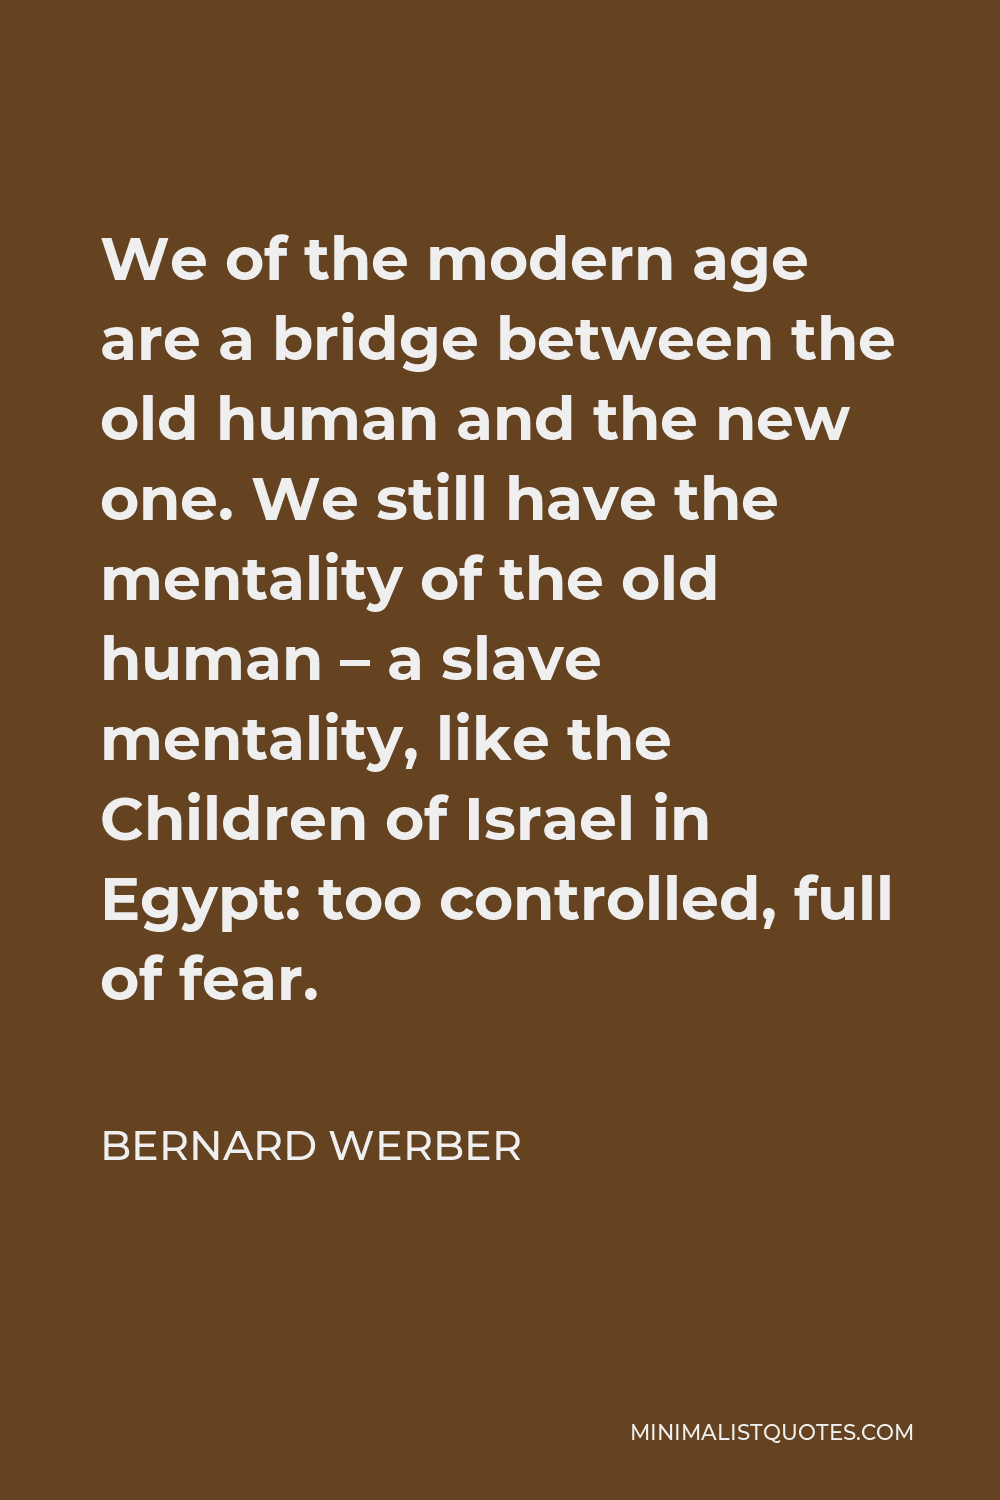 Bernard Werber Quote - We of the modern age are a bridge between the old human and the new one. We still have the mentality of the old human – a slave mentality, like the Children of Israel in Egypt: too controlled, full of fear.